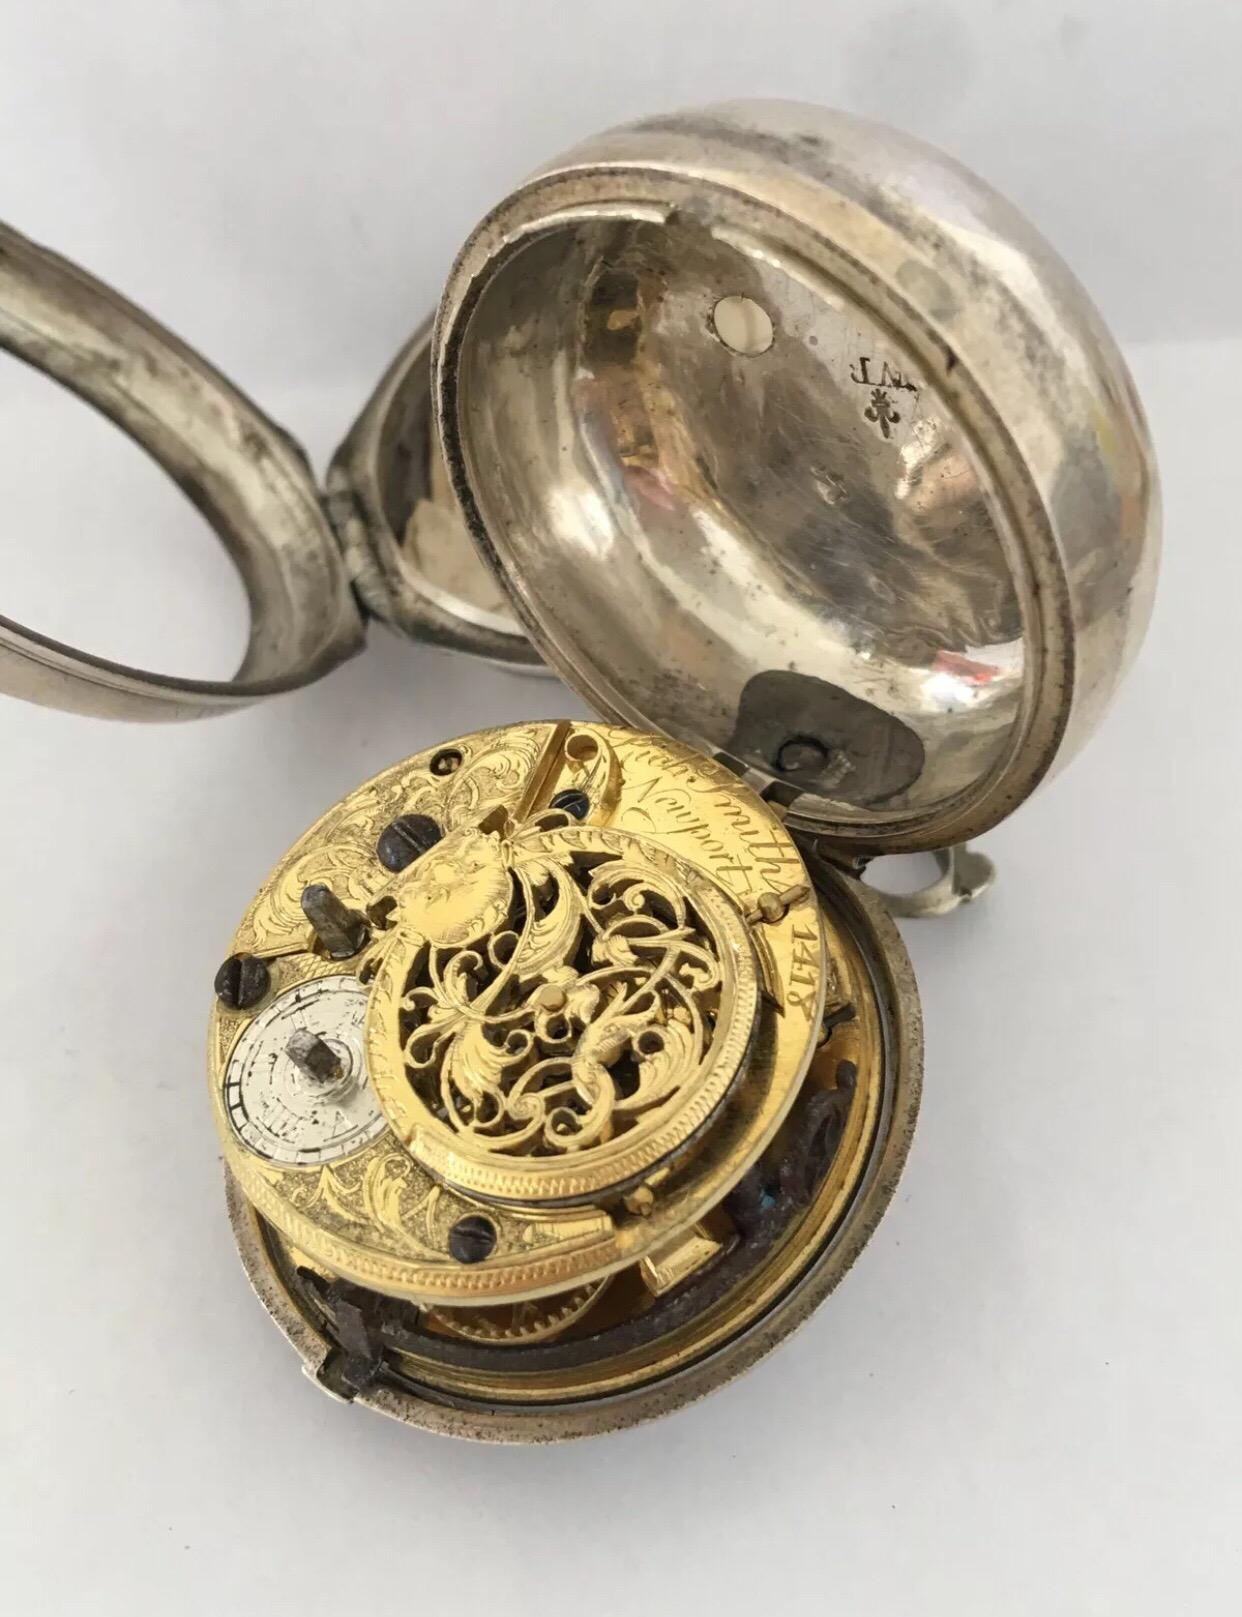 Women's or Men's Early Verge English Fusee Pocket Watch Signed Richard Smith, Newport, circa 1730